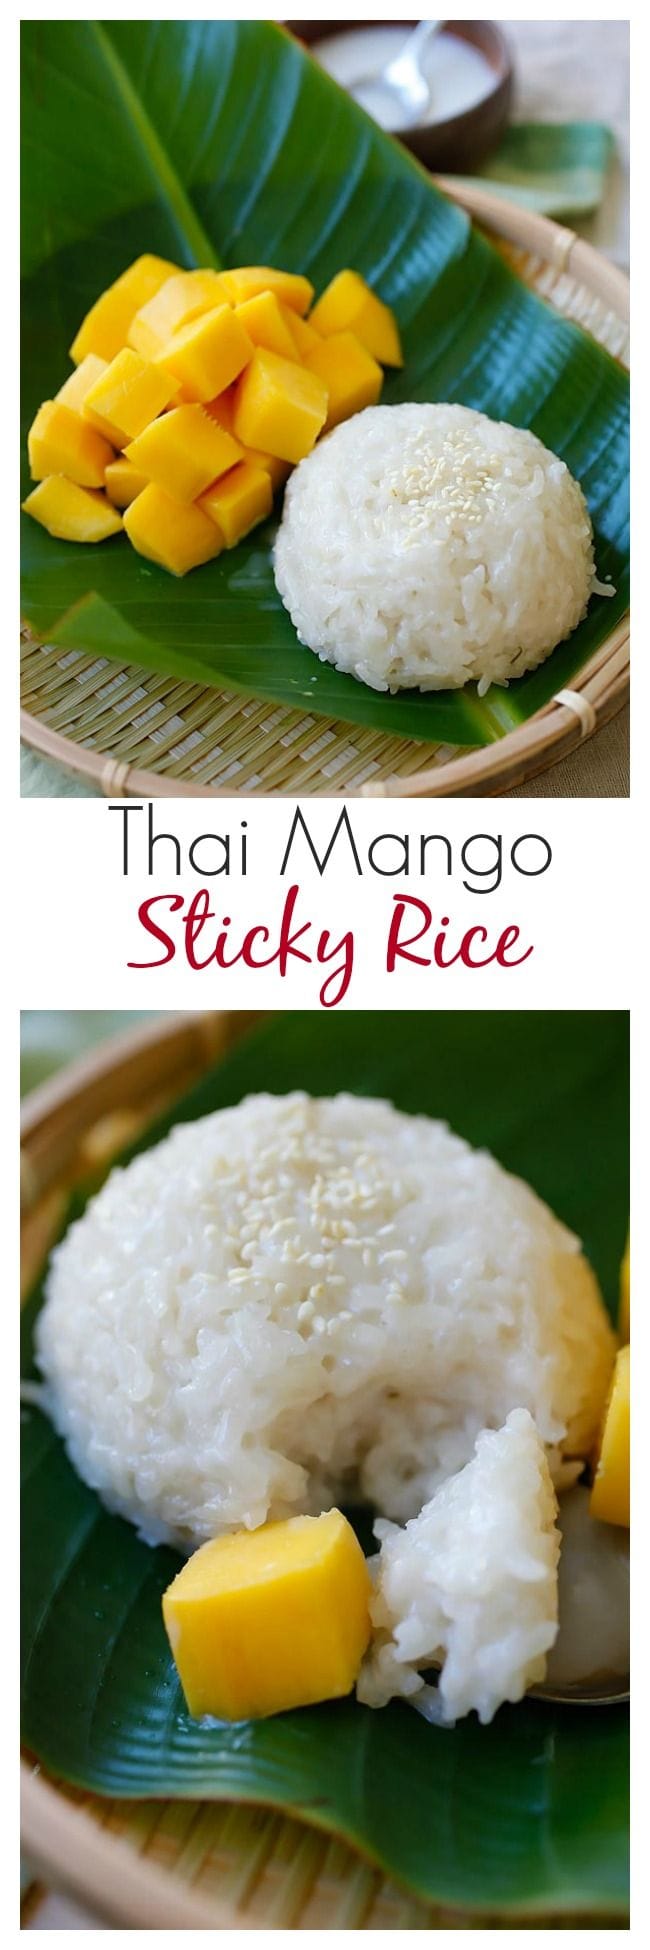 Mango sticky rice – a popular sweet sticky rice with coconut milk and fresh mangoes. Make your favorite Southeast Asian dessert at home | rasamalaysia.com